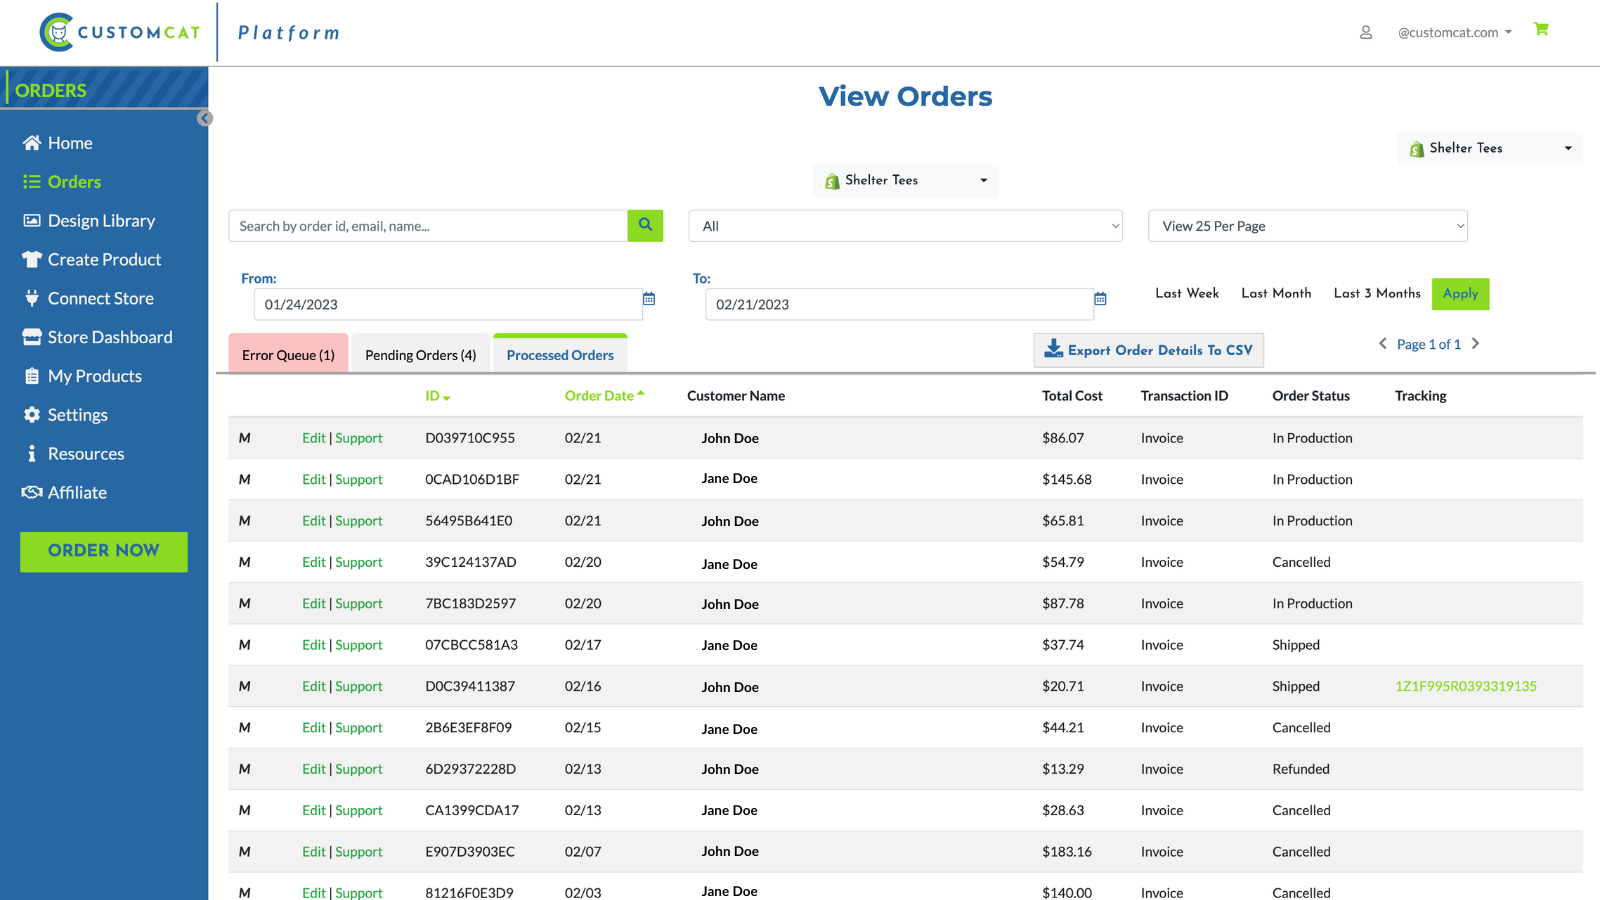 Manage Orders from the CustomCat Dashboard